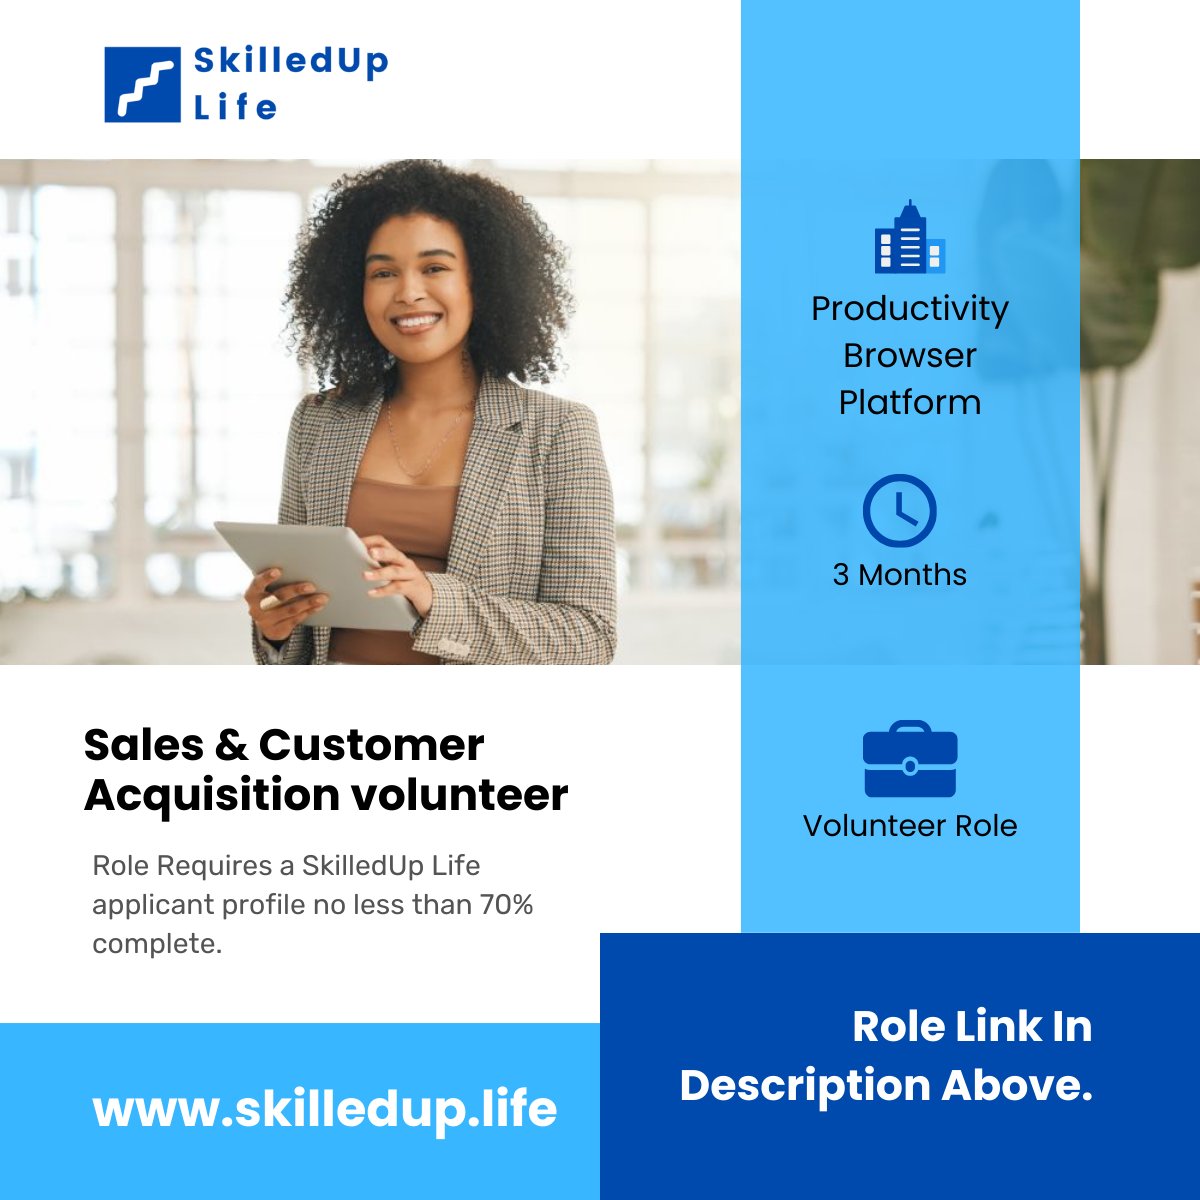 Dive into the world of sales and customer acquisition with Coach Tribe! Join us as a volunteer and make an impact. Click on the link below to learn more about this opportunity skilledup.life/opportunity/co…
#Sales
#CustomerAcquisition
#VolunteerOpportunity
#SkilledUpLife
#CoachTribe